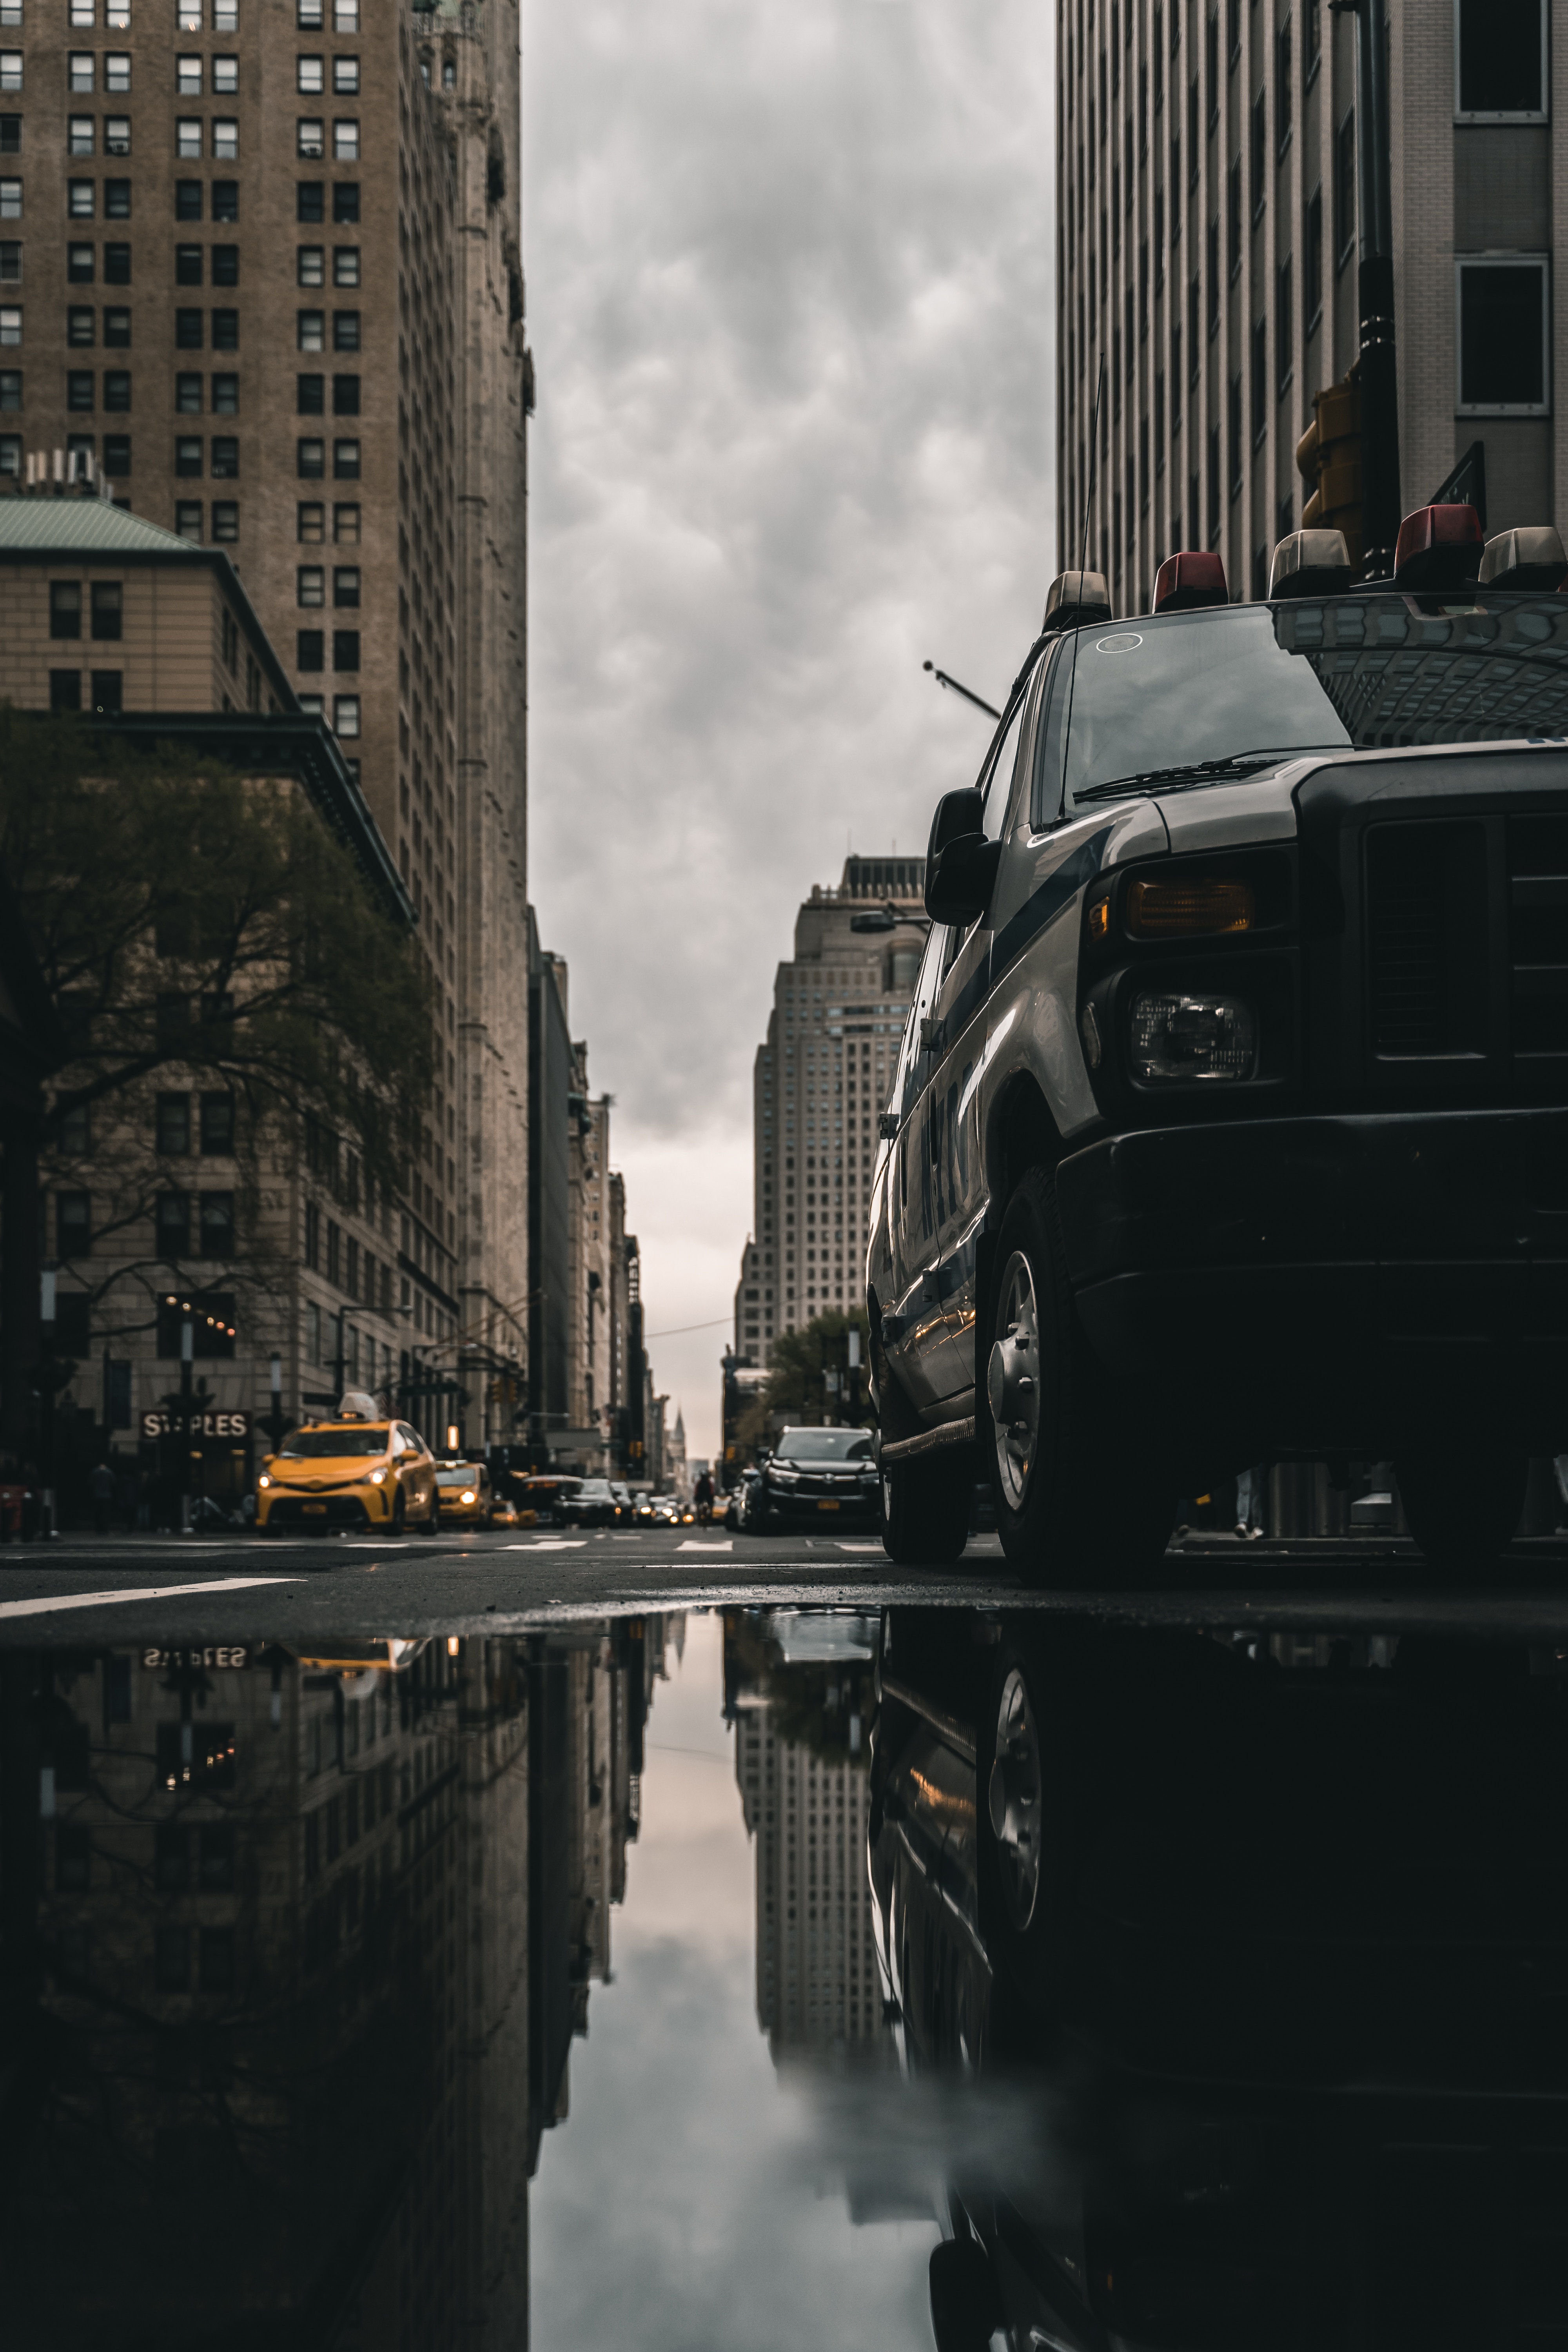 reflection, asphalt, street, cities, building, cars, puddle High Definition image